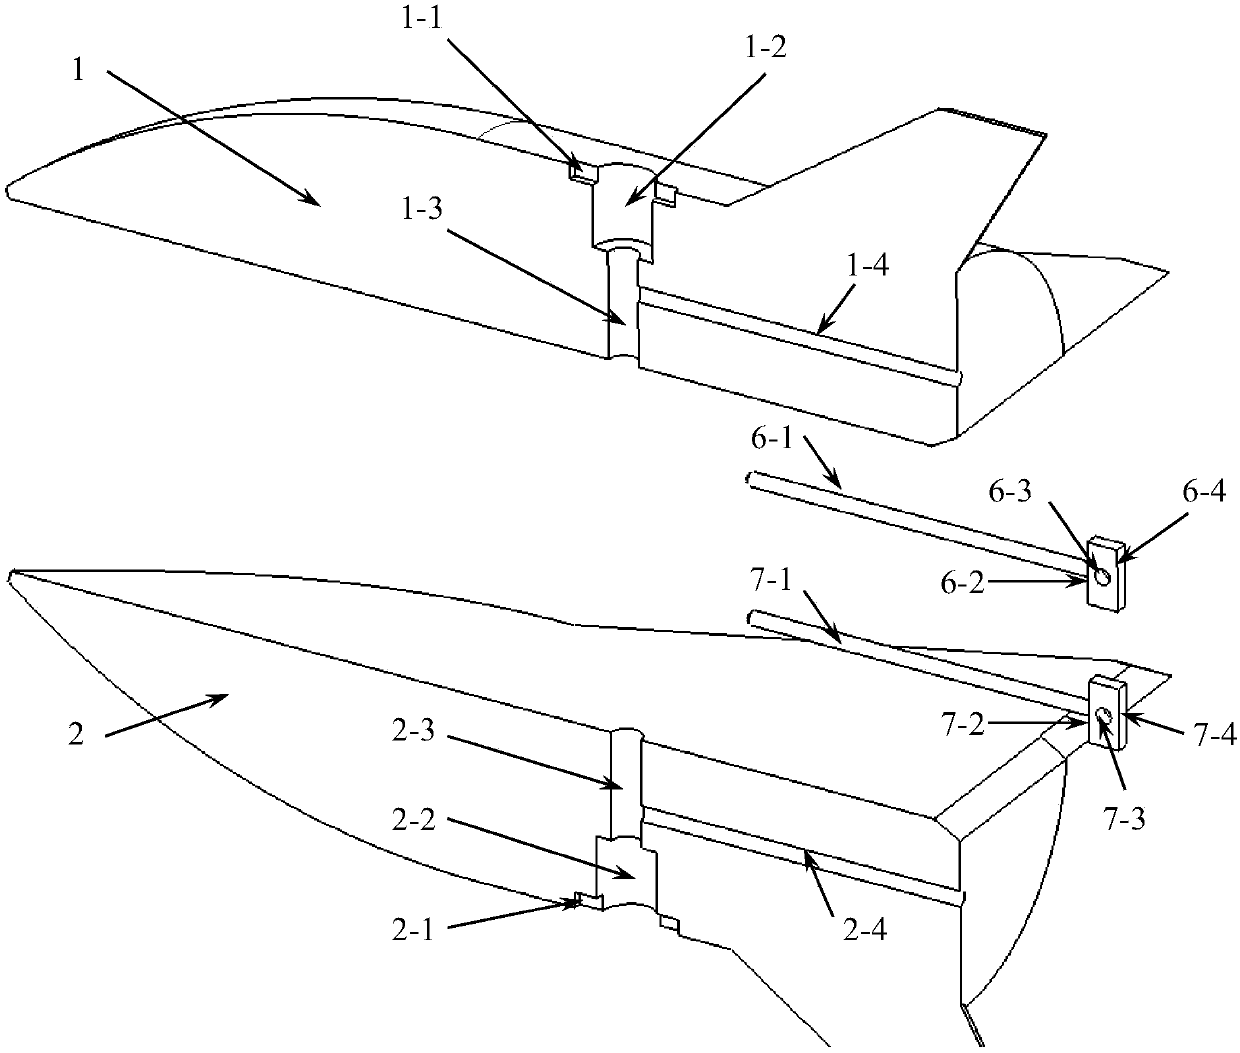 Parallel stage separation free flight wind tunnel testing device with mass center located on interface